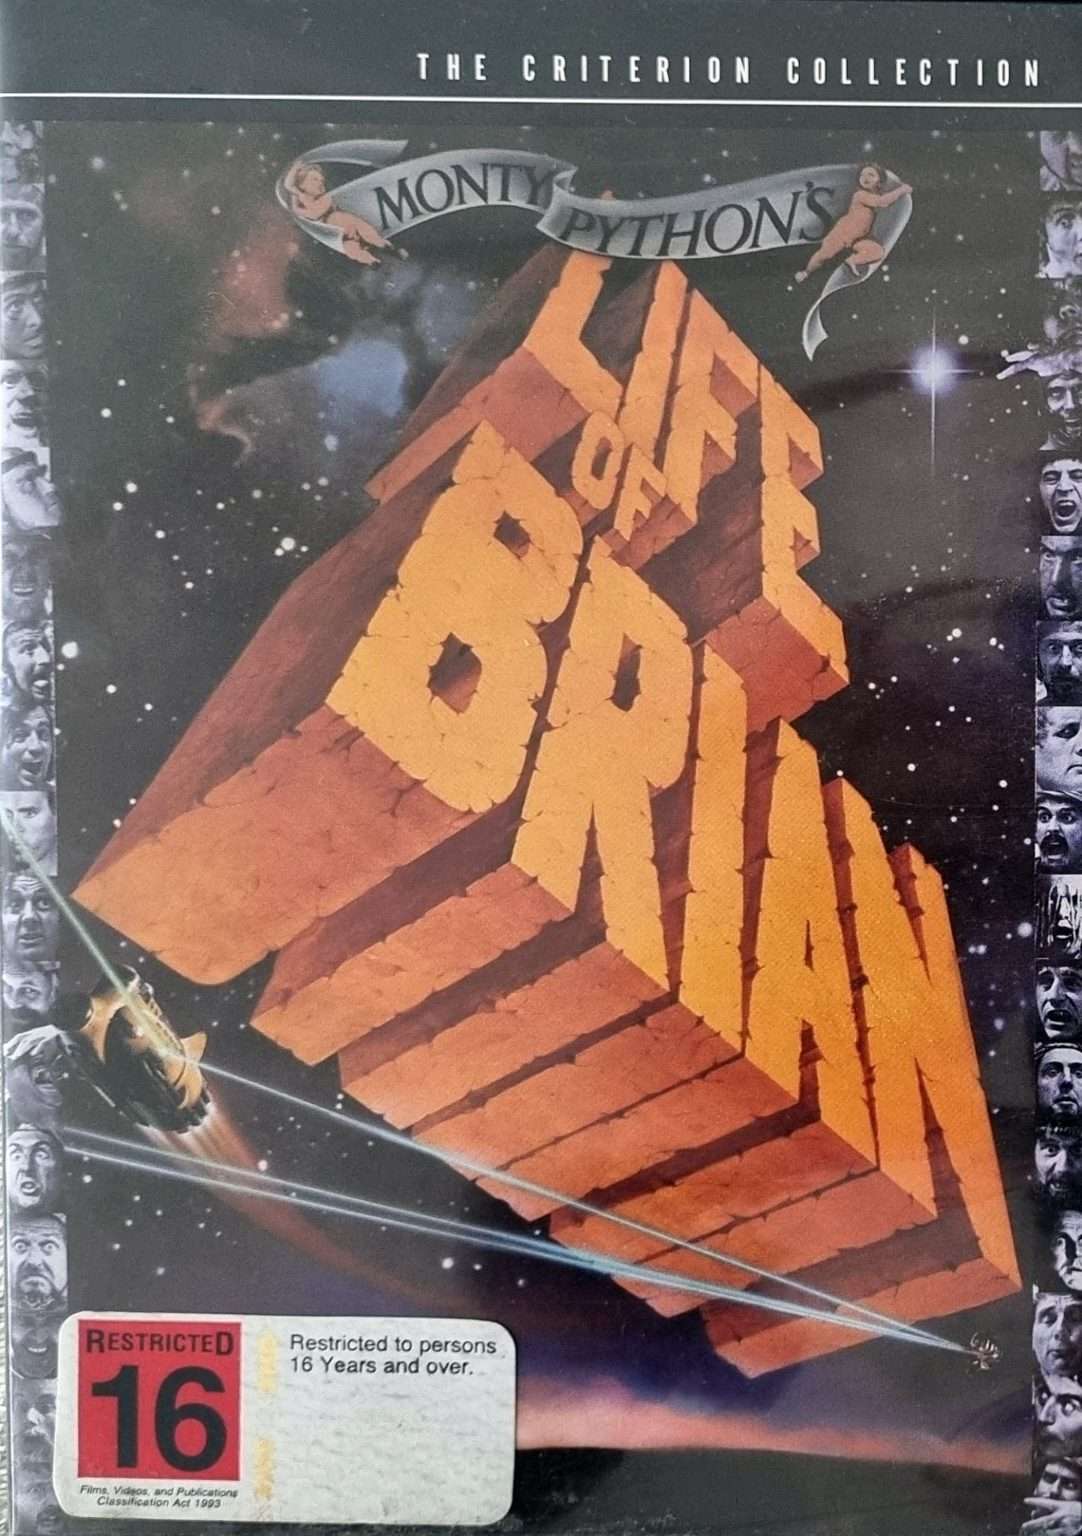 Monty Python's Life of Brian - The Criterion Collection